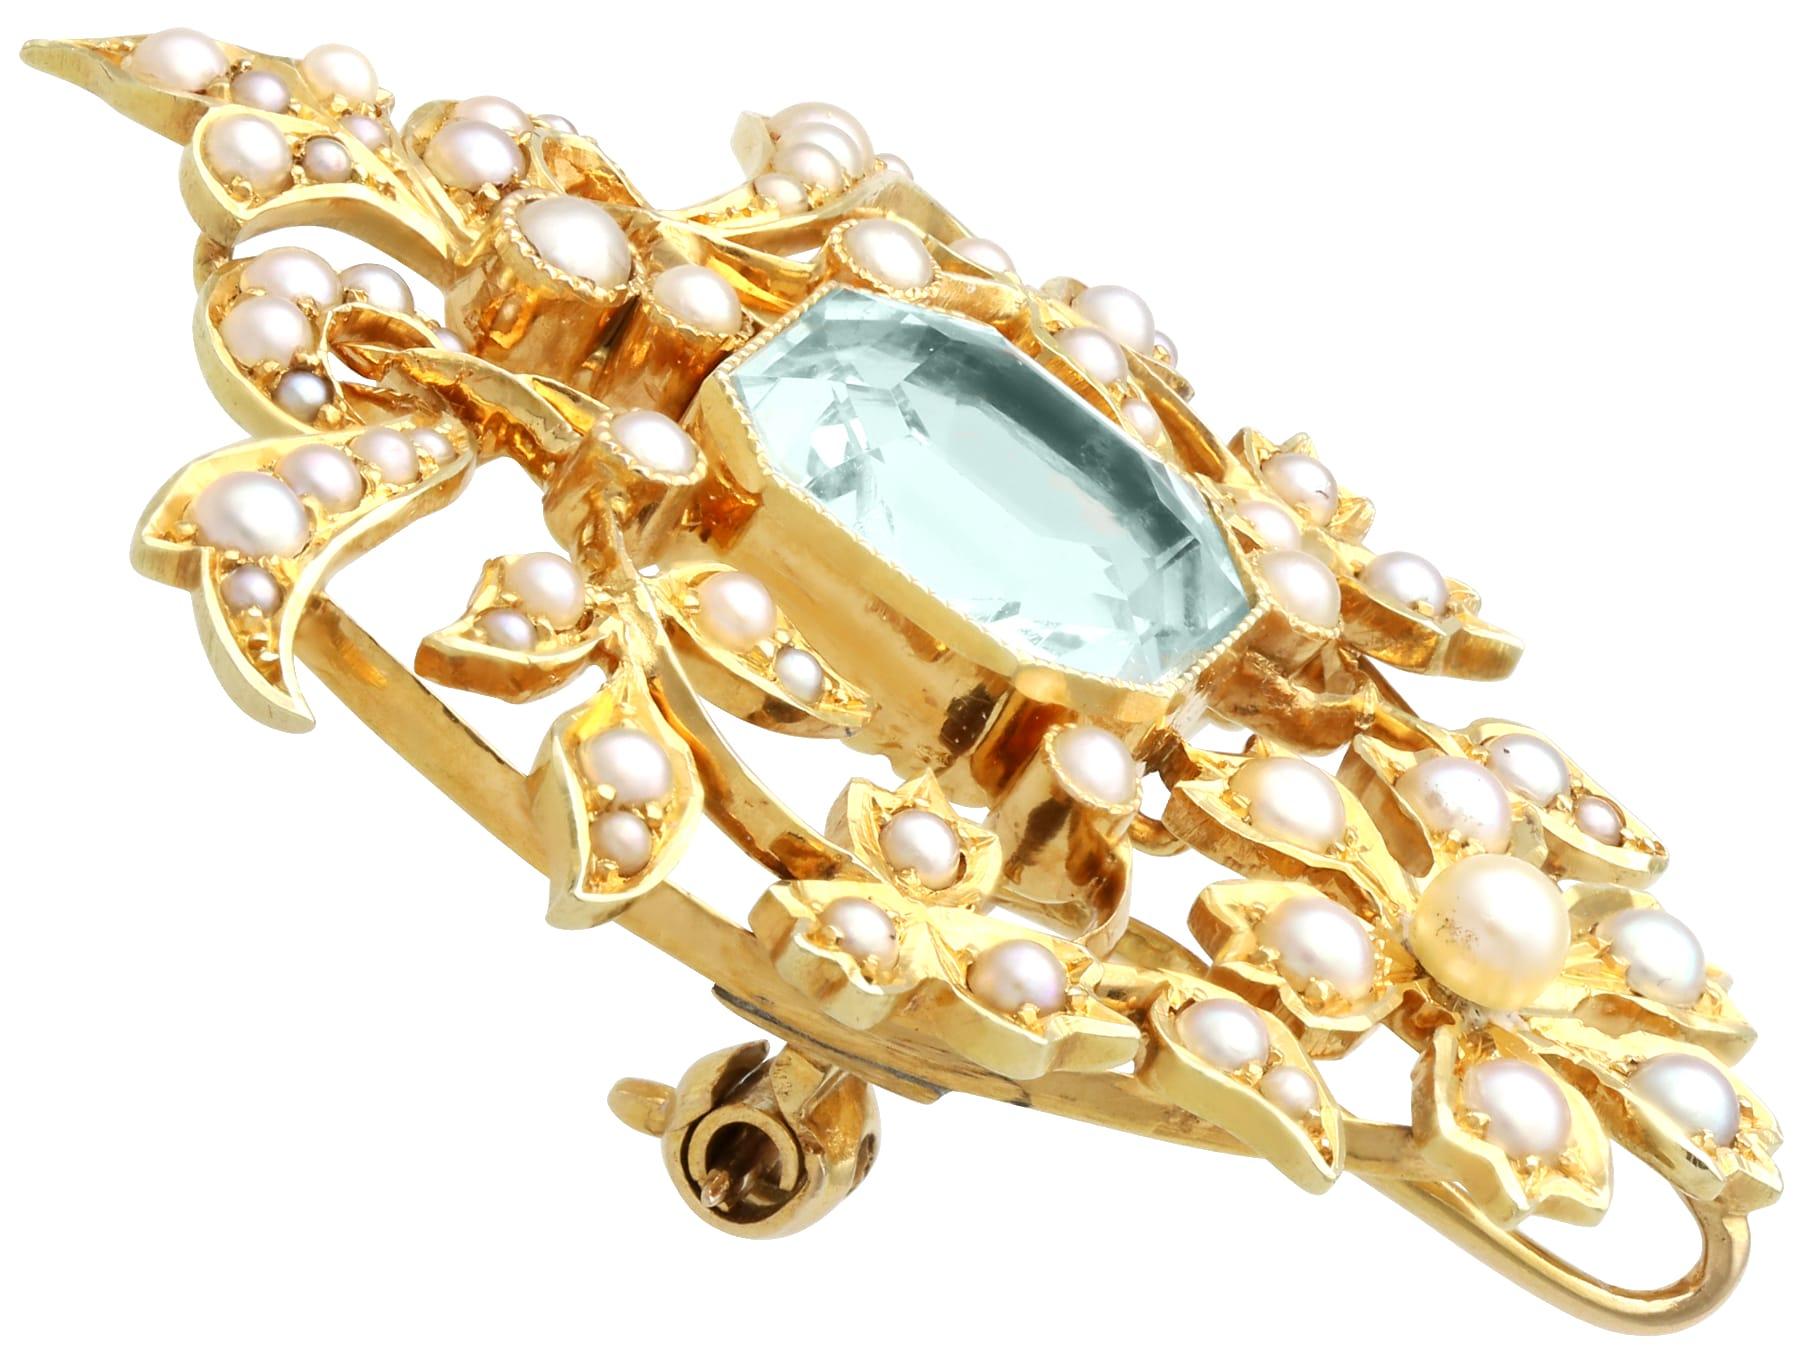 Antique 4.10Ct Aquamarine and Seed Pearl 15k Yellow Gold Pendant / Brooch  For Sale 1